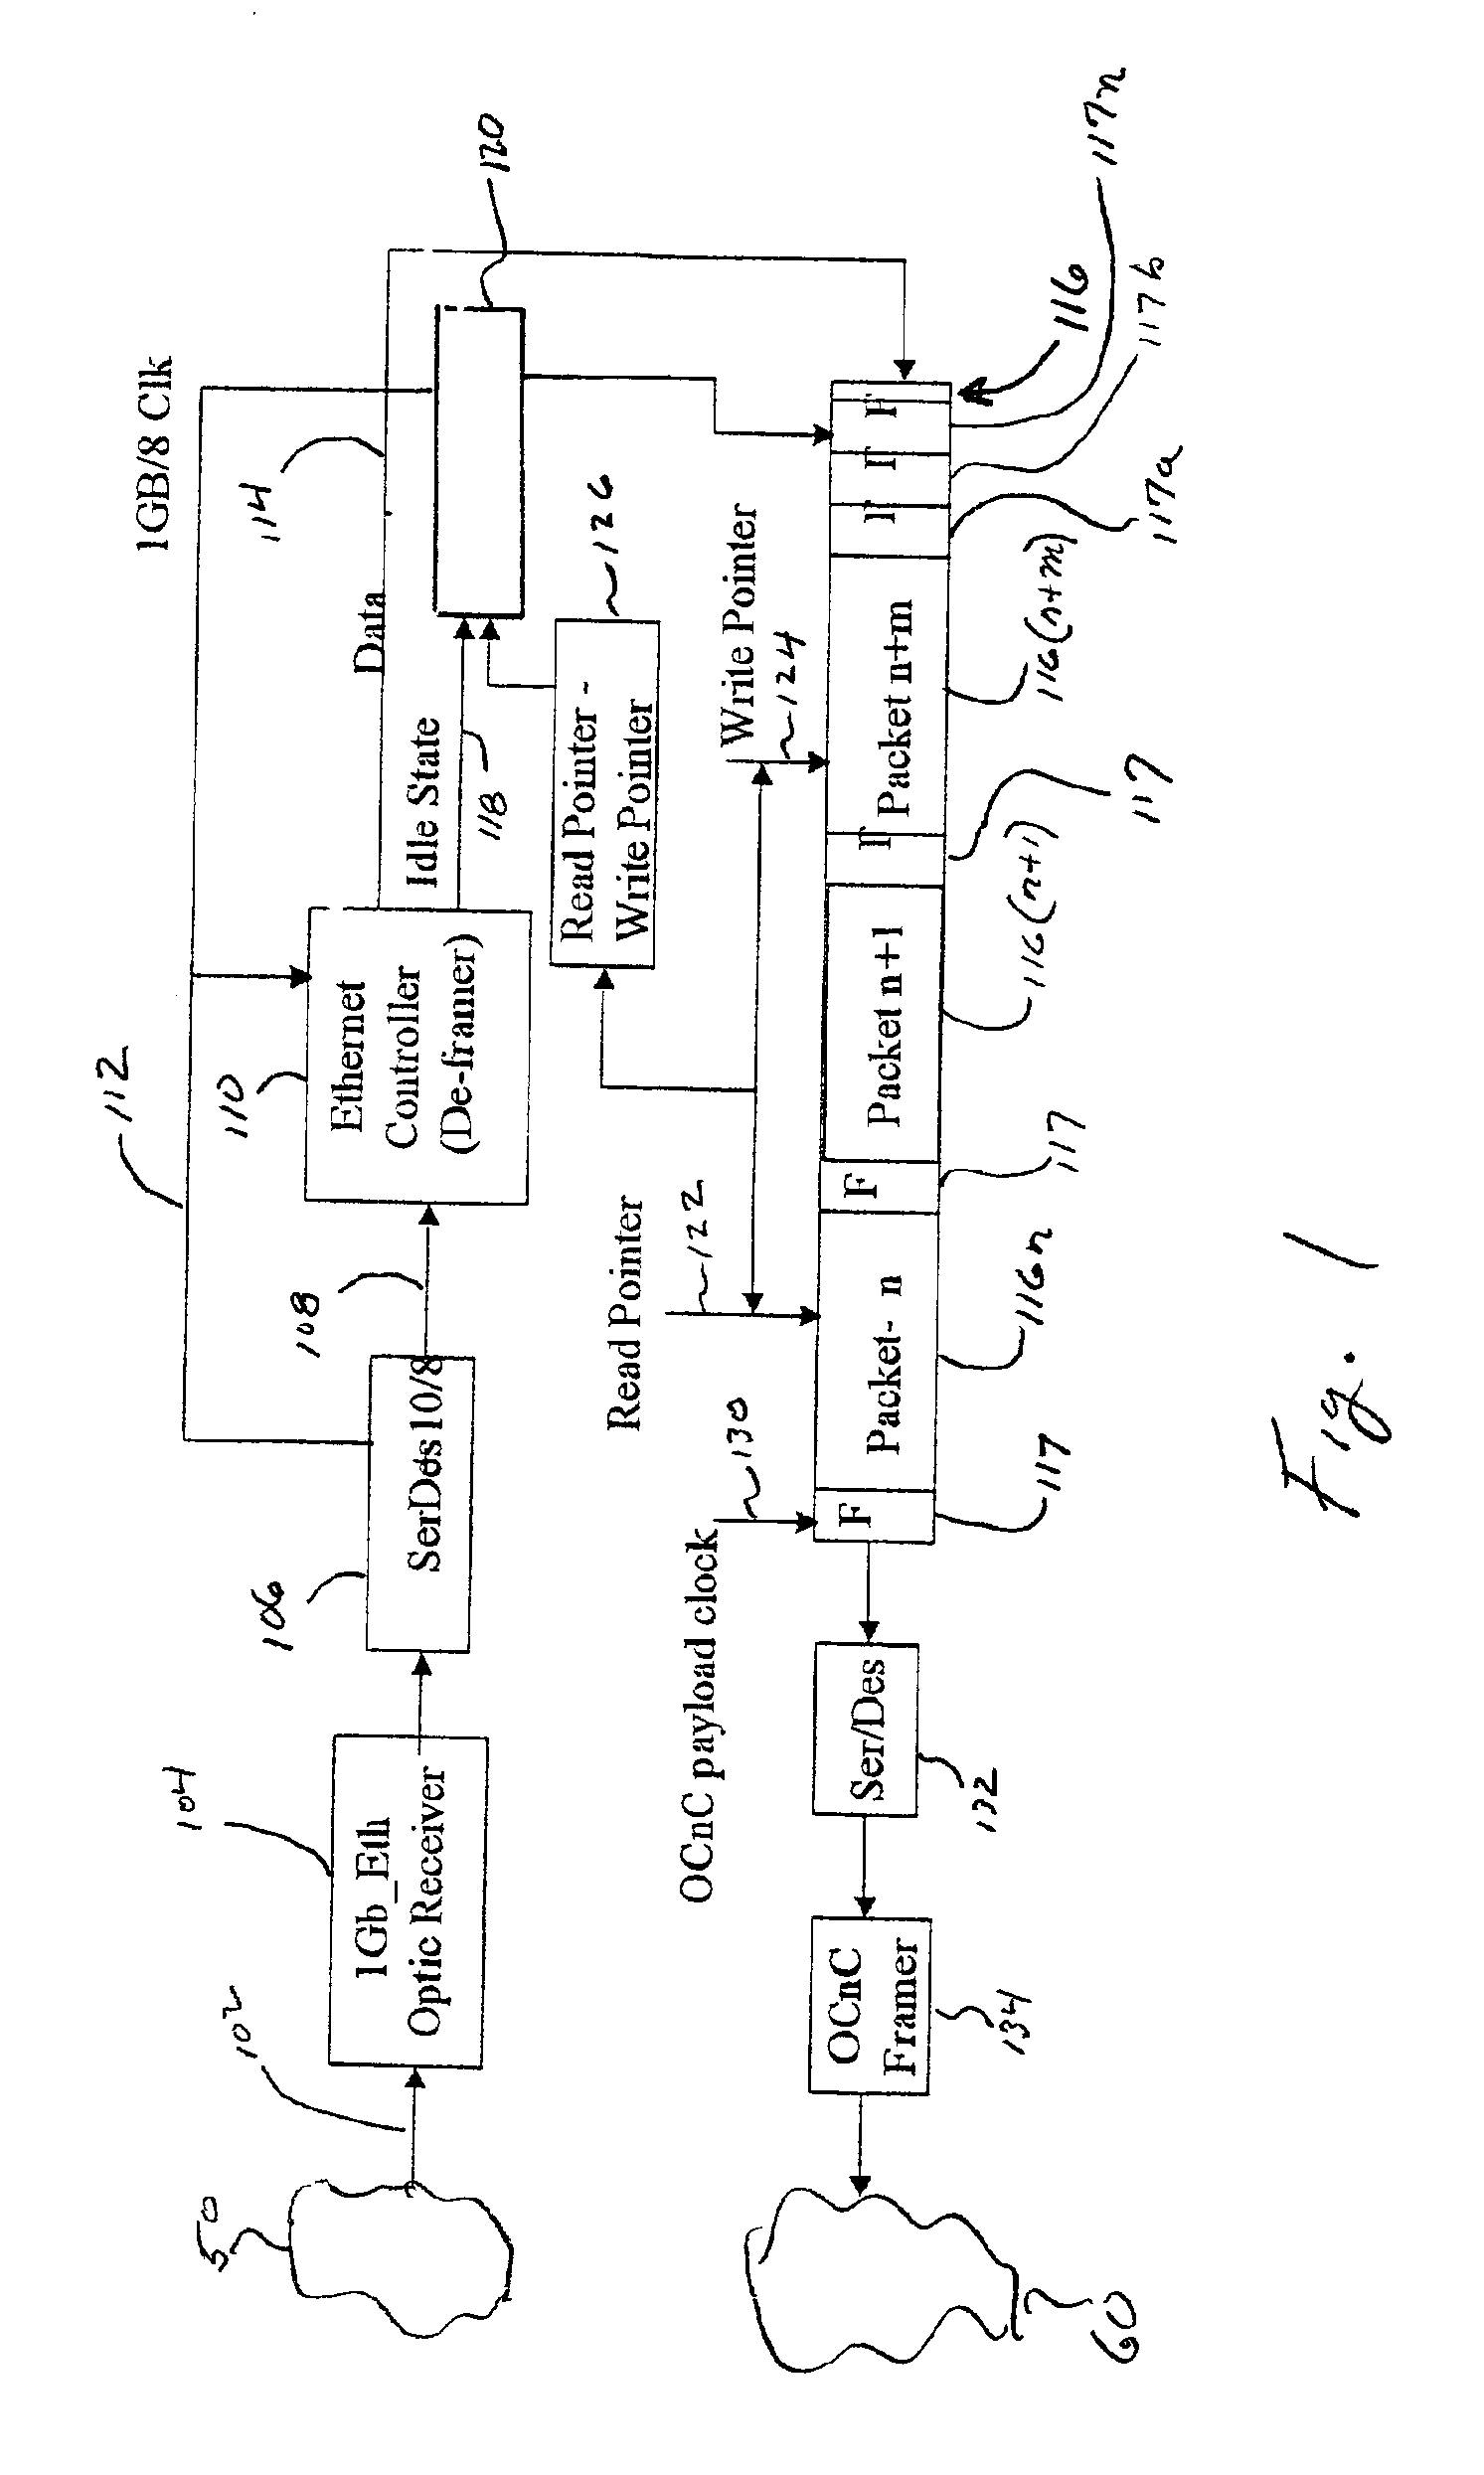 Method and apparatus for converting data packets between a higher bandwidth network and a lower bandwidth network